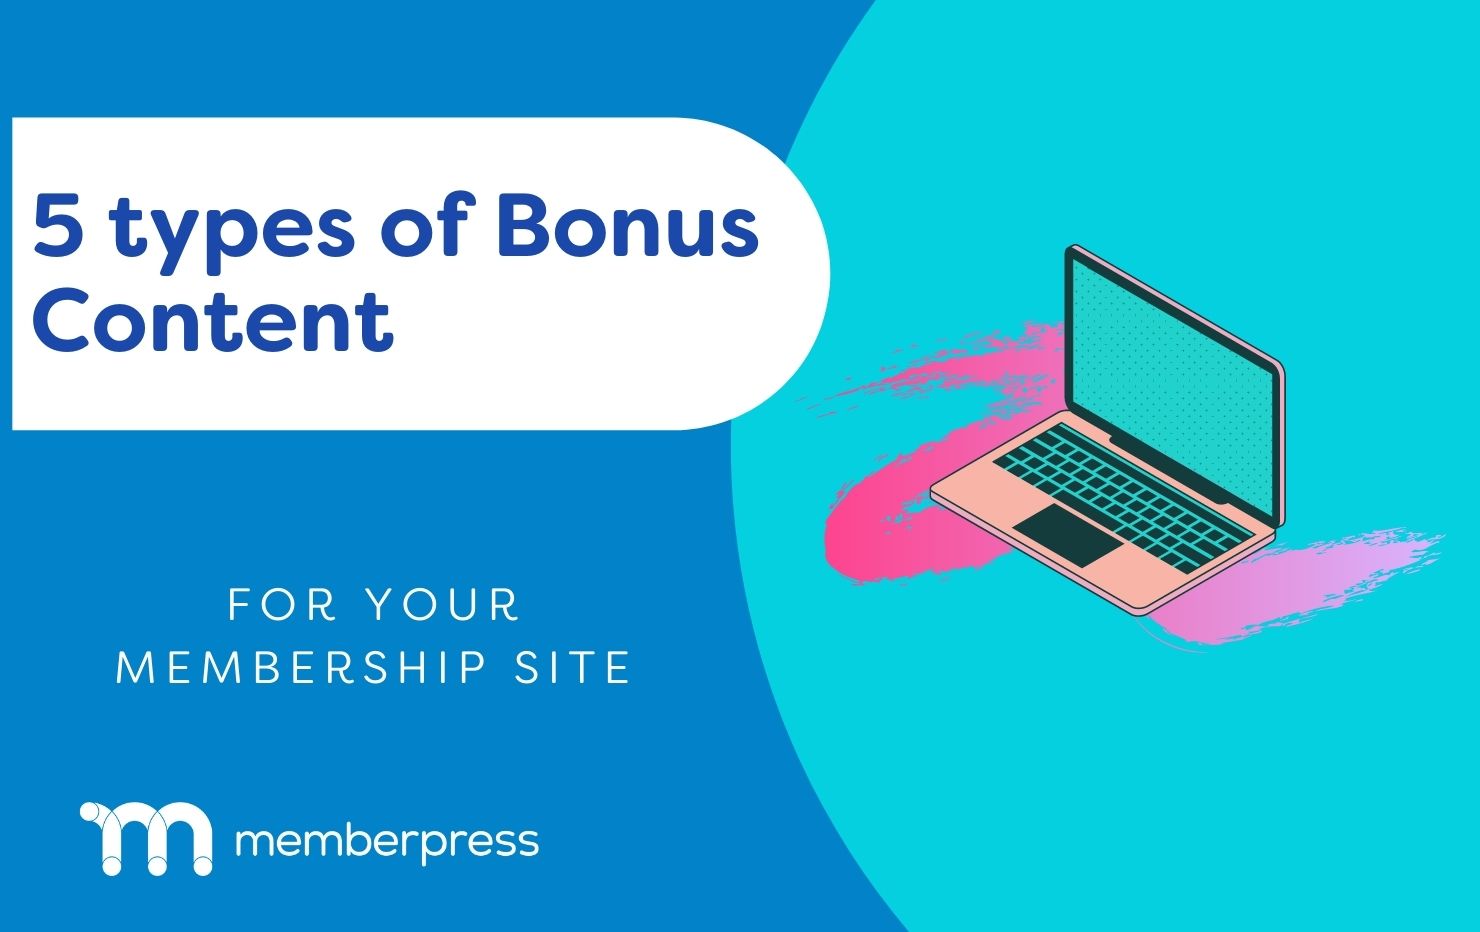 A graphic with a laptop. Text reads "5 types of Bonus Content for Your Membership Site".